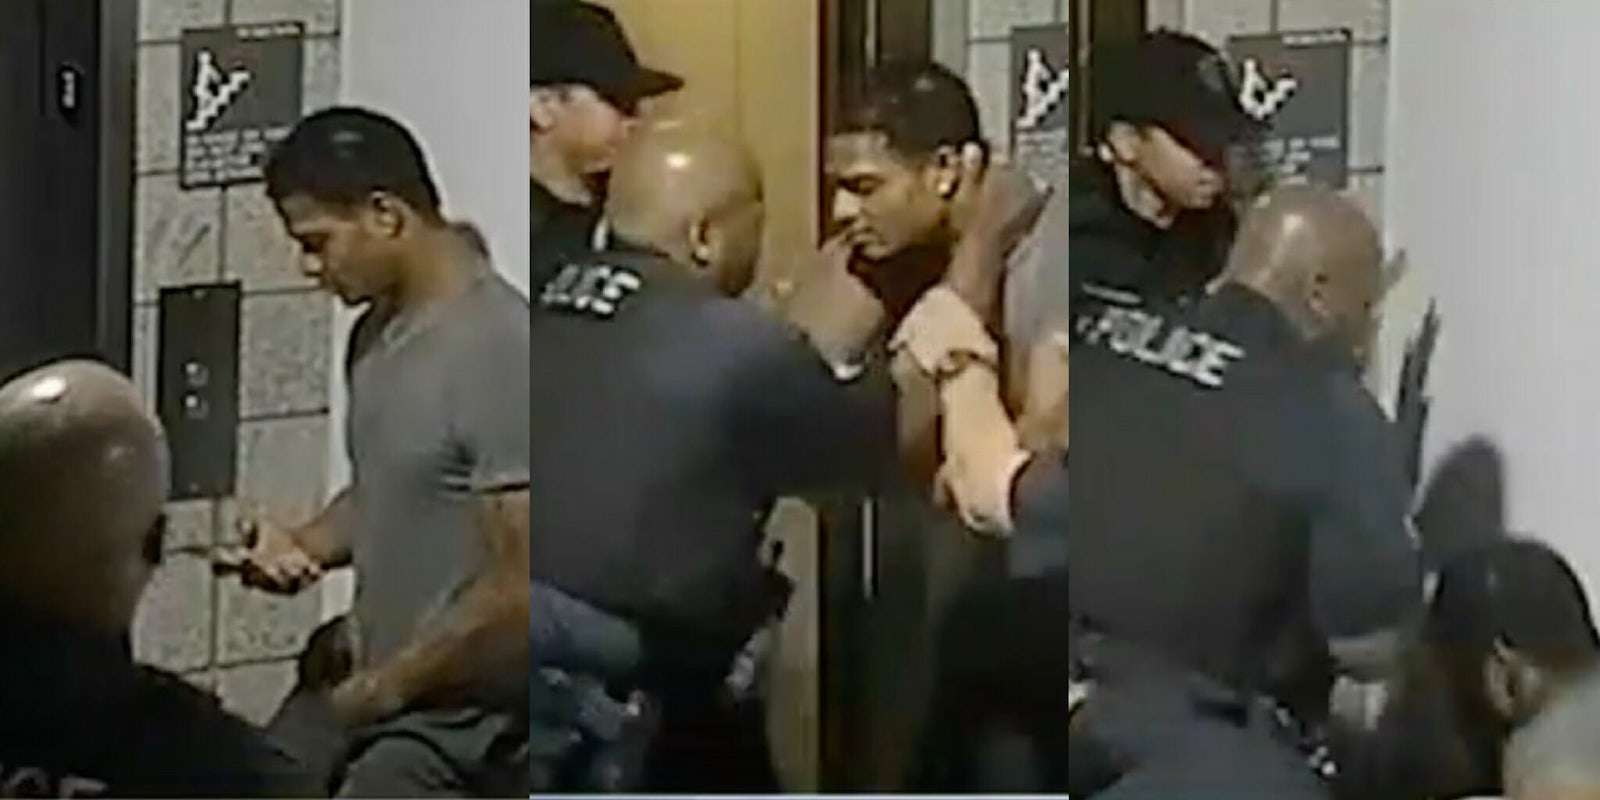 Four Mesa, Arizona, police officers beat an unarmed Black man for not sitting down.